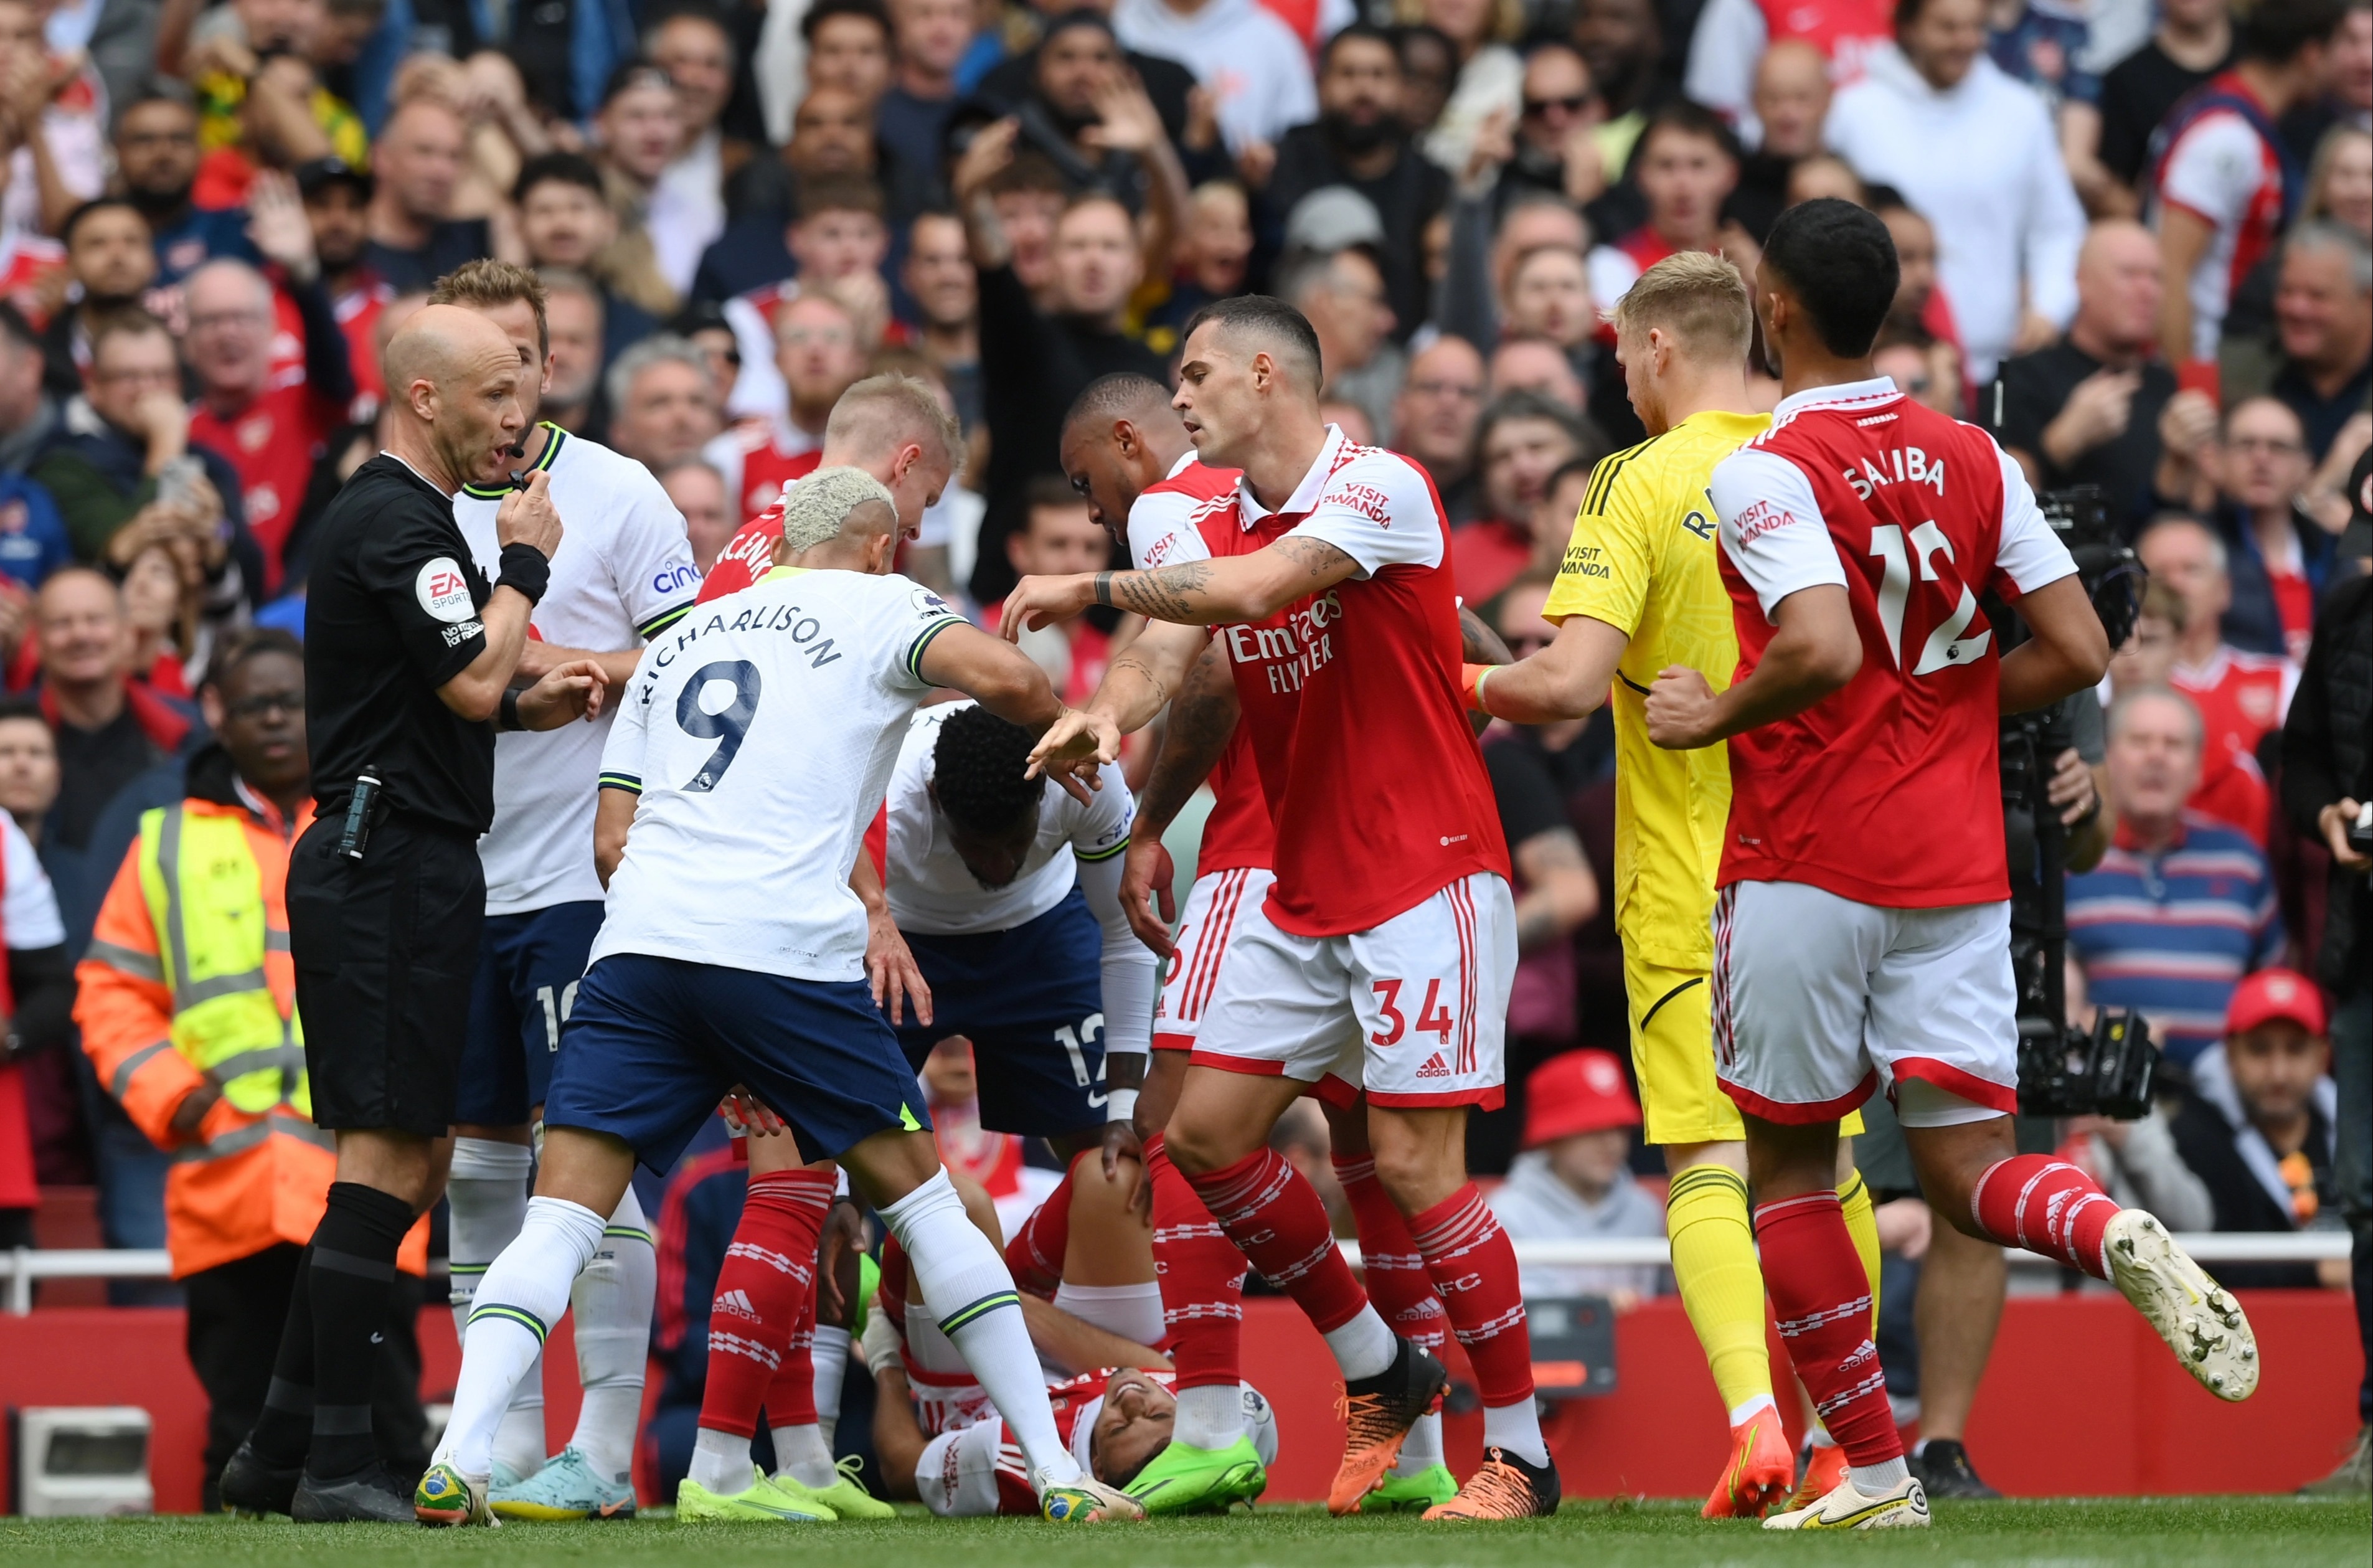 , Tottenham star Emerson Royal shown straight red card for horror challenge on Arsenal’s Gabriel Martinelli sparking clash